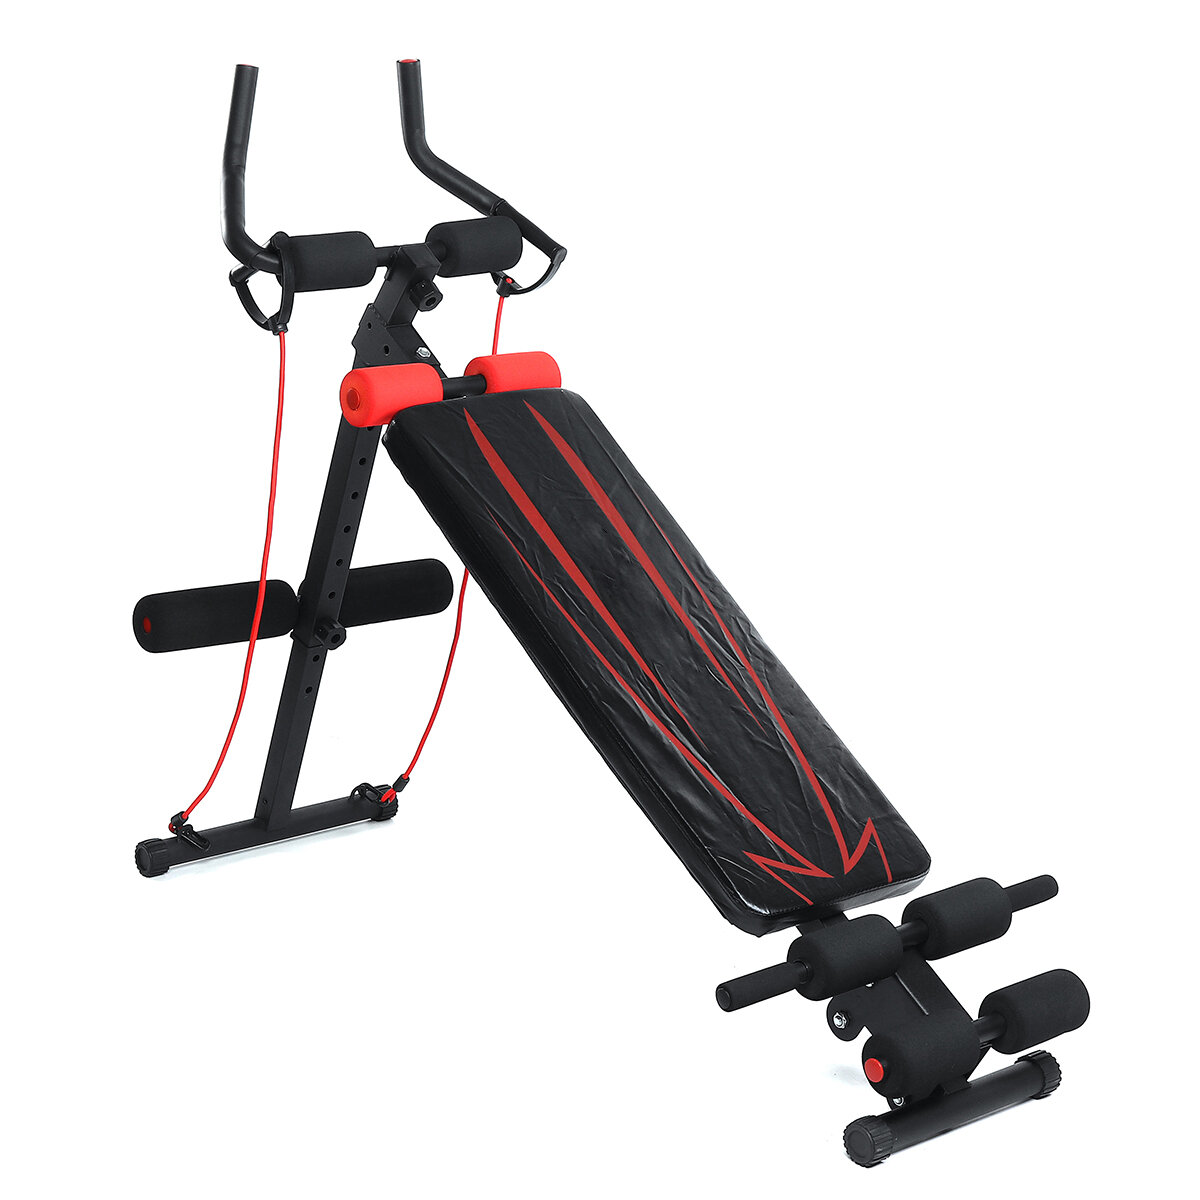 Abdominal Muscle Training Device Roller Coasters Vertical Waist Beauty Machine Home Gym Supine Abdomen Sit-up Benches